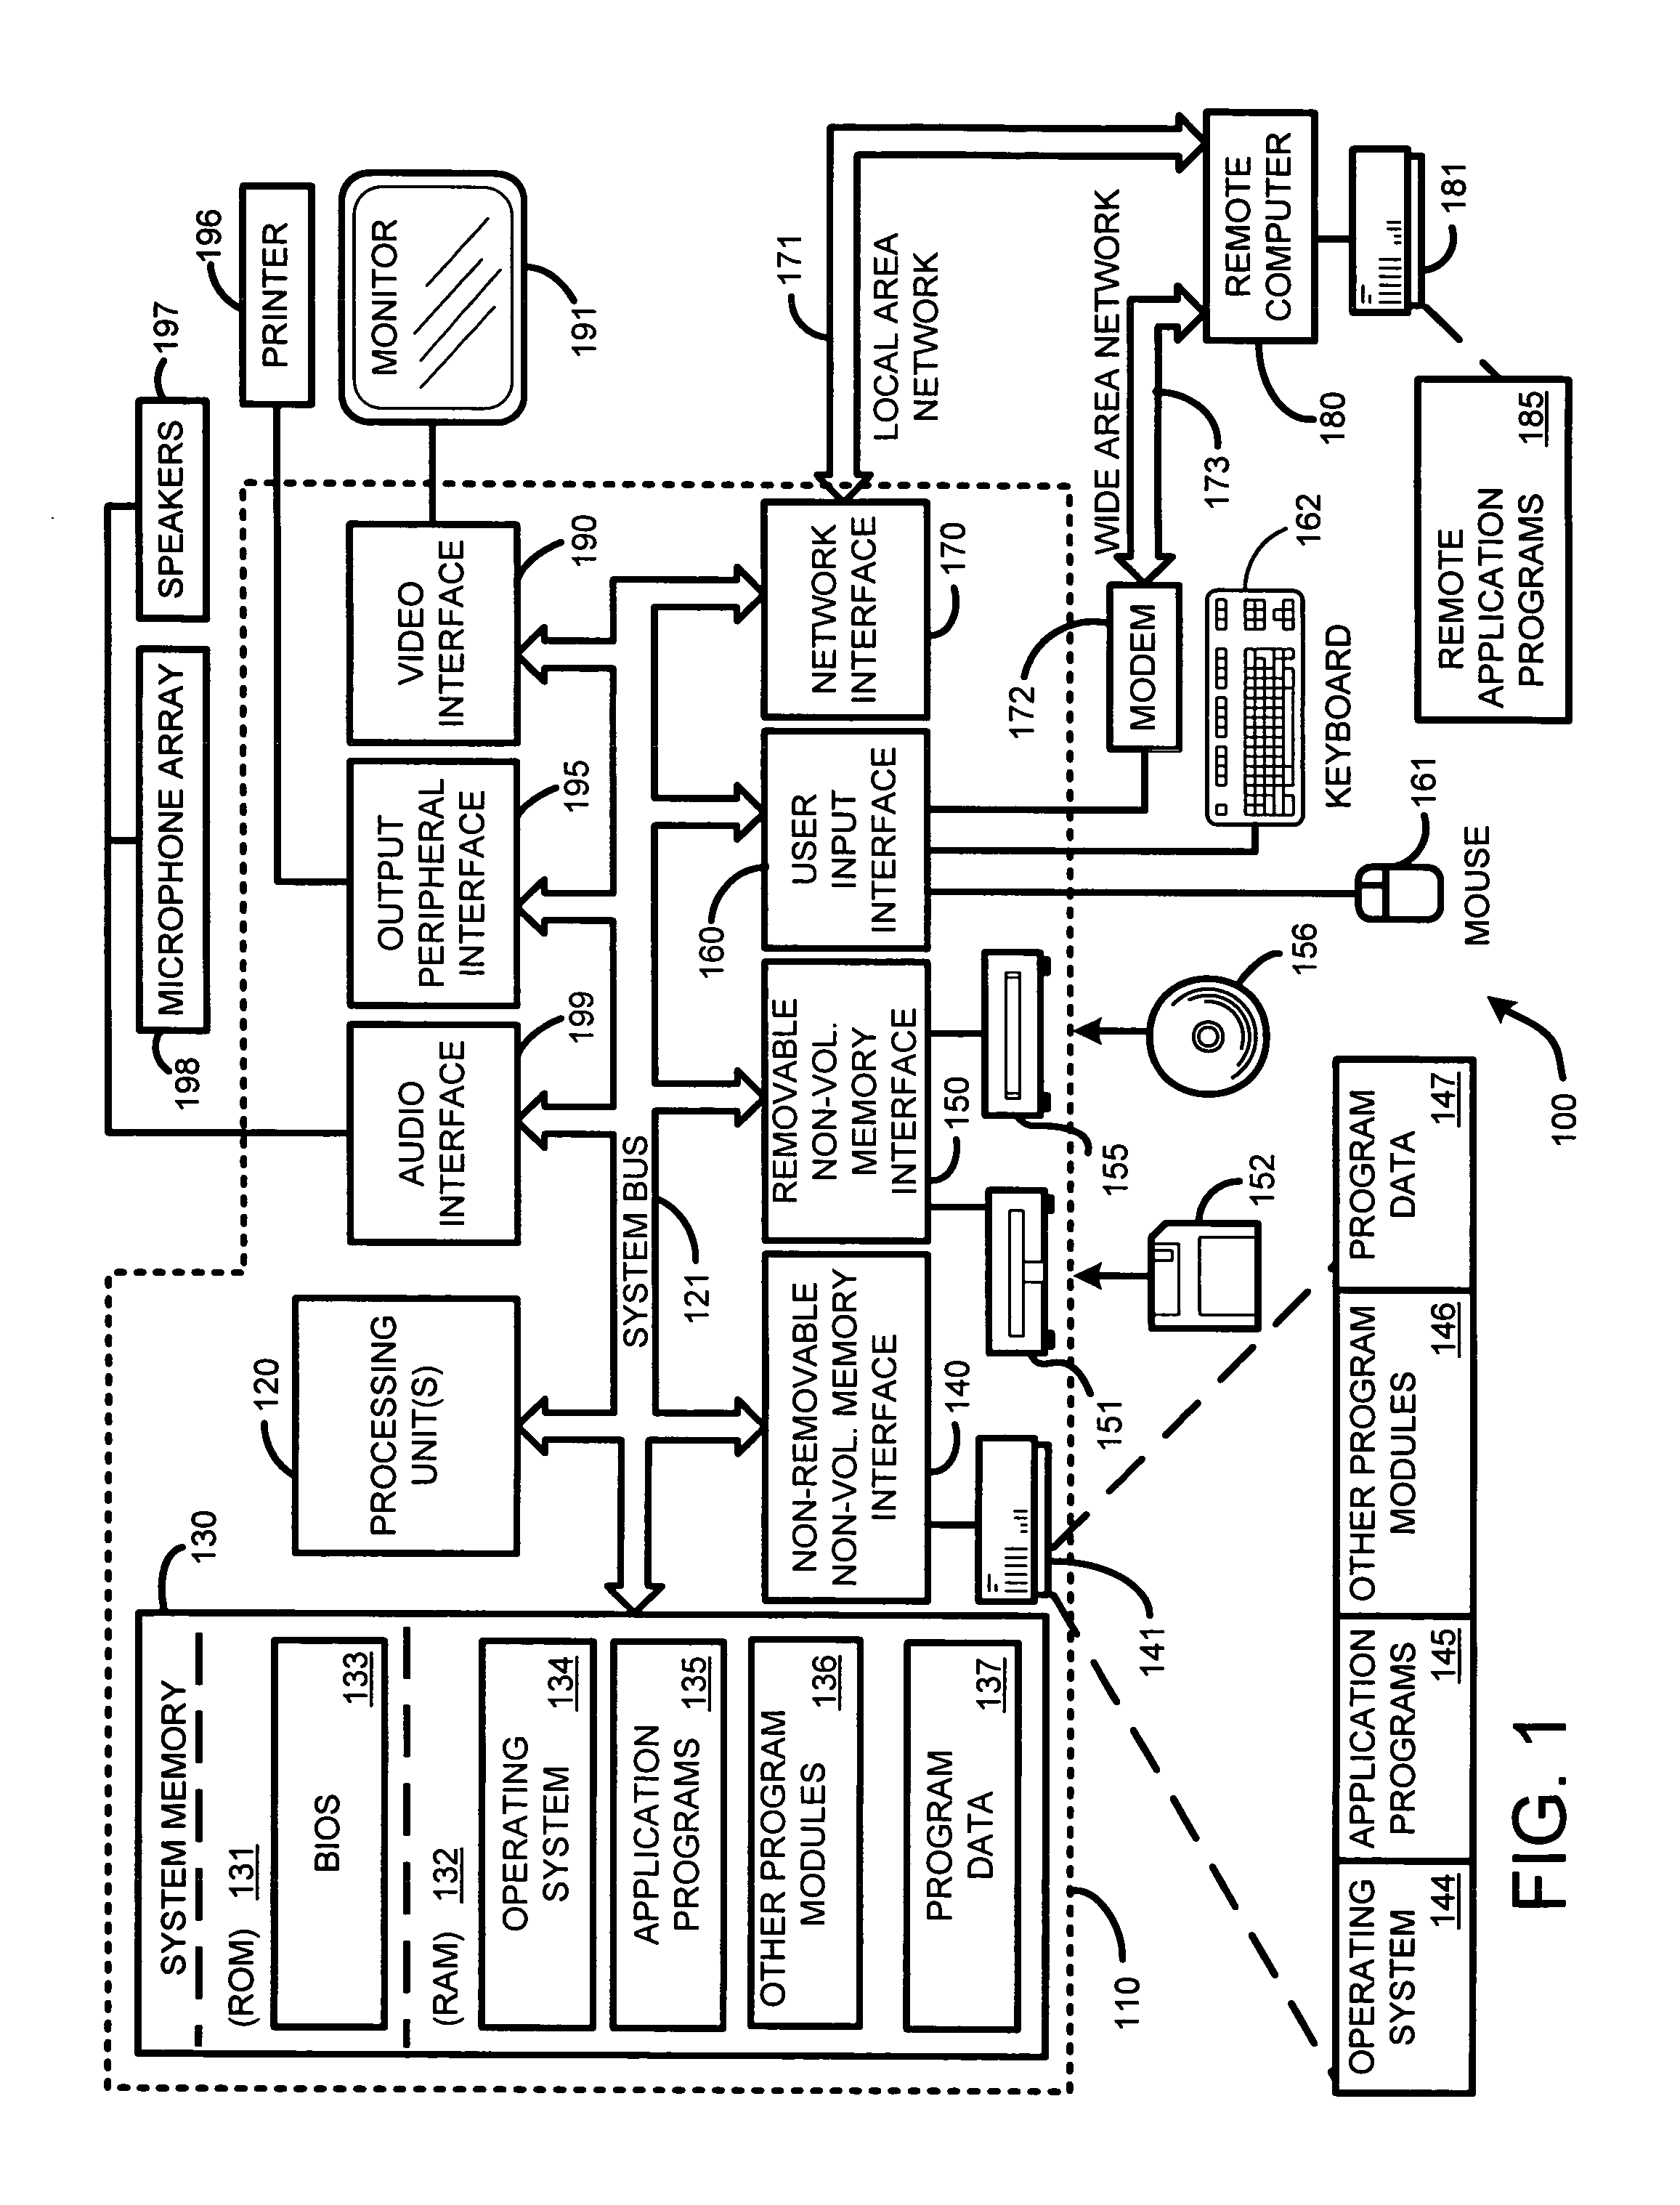 System and method for improving the precision of localization estimates